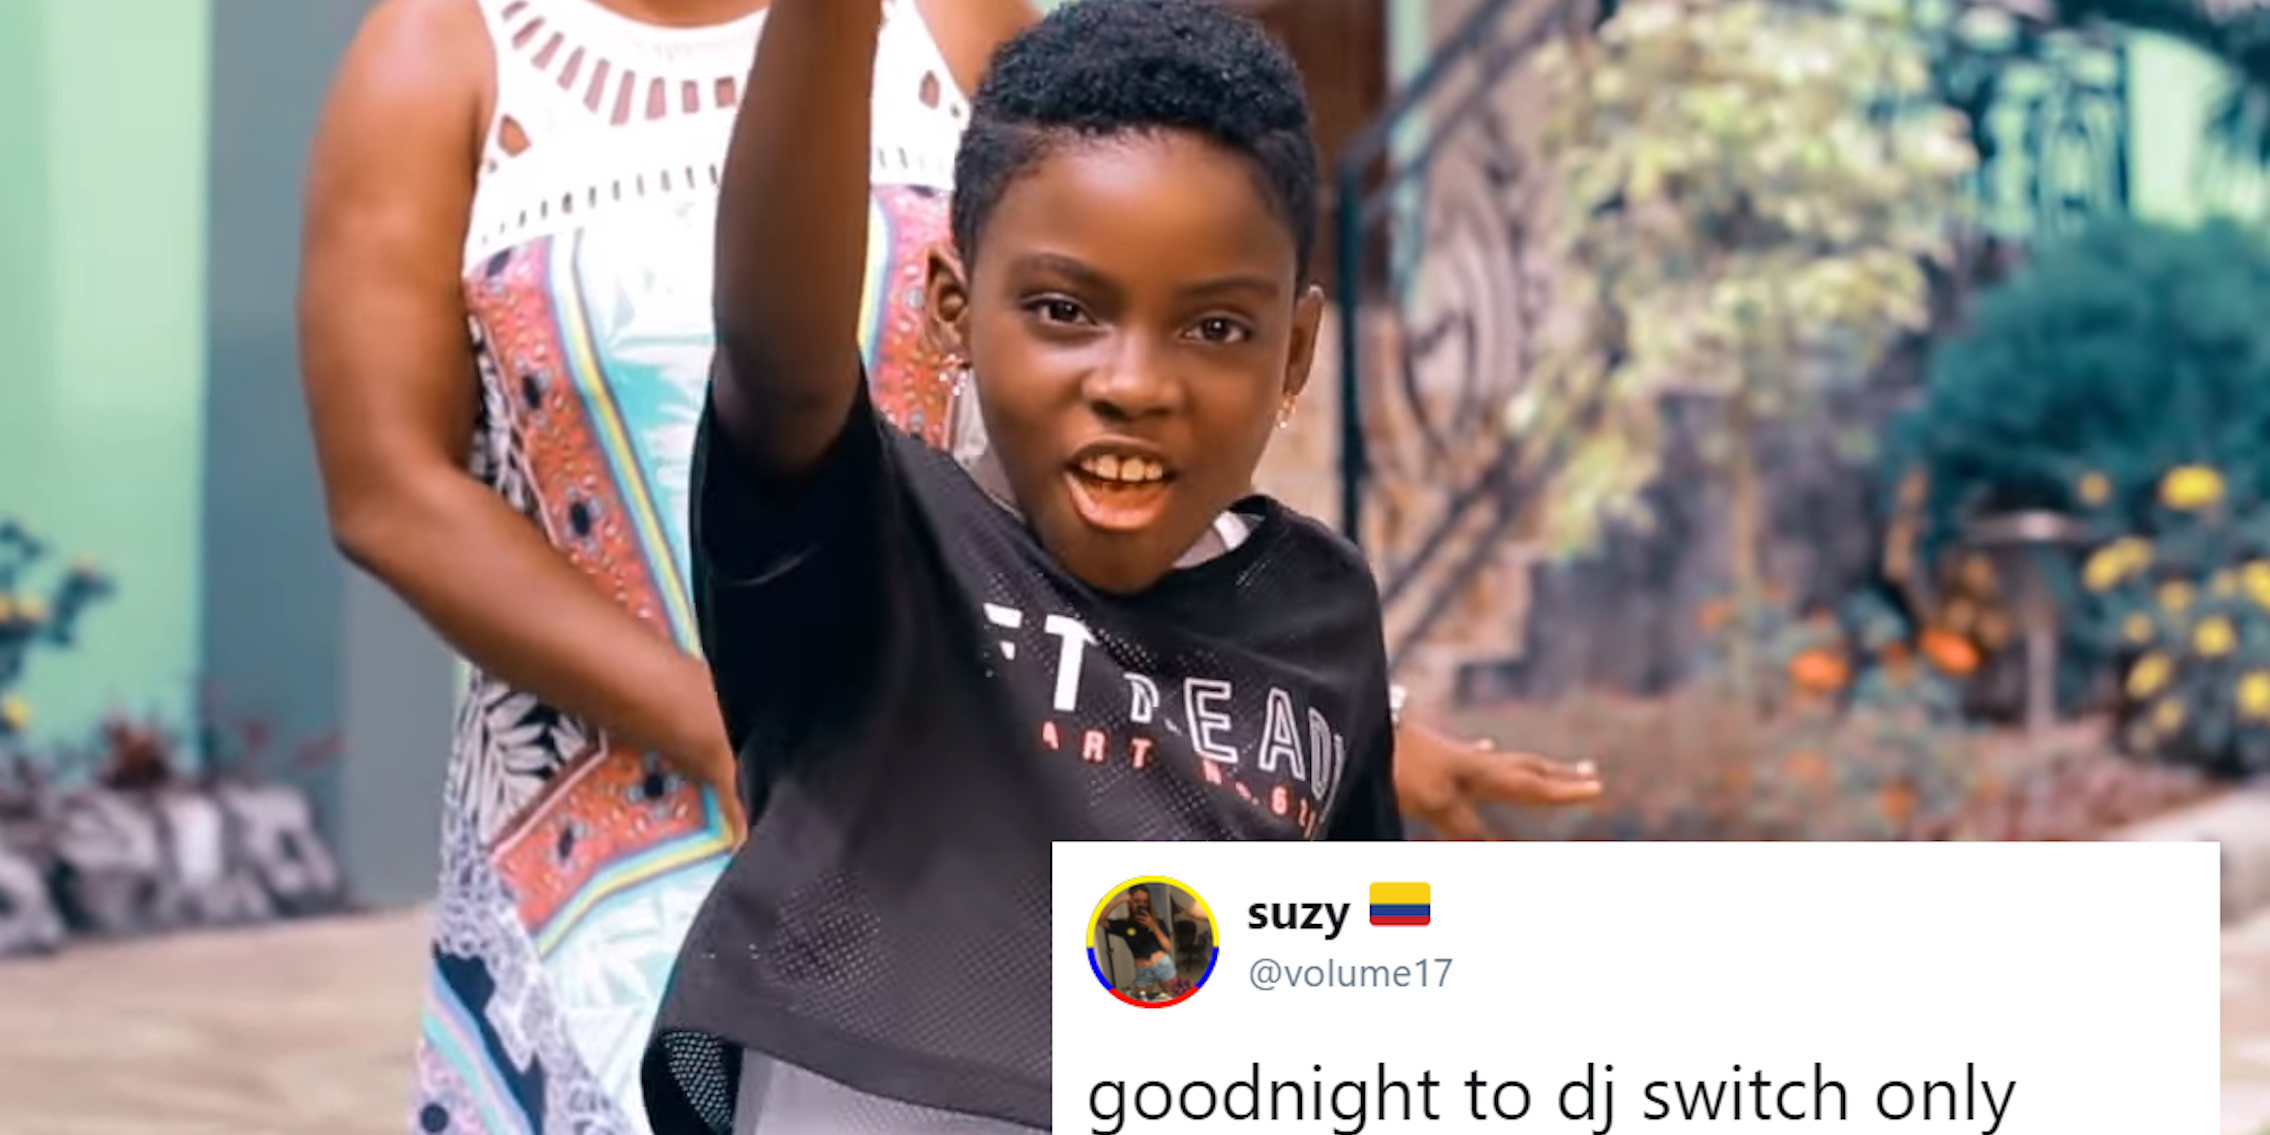 Erica Tandoh, a 10-year-old girl from Ghana who goes by the name DJ Switch, captured the hearts of Twitter users everywhere after BBC Africa tweeted a link to its profile of the young superstar.